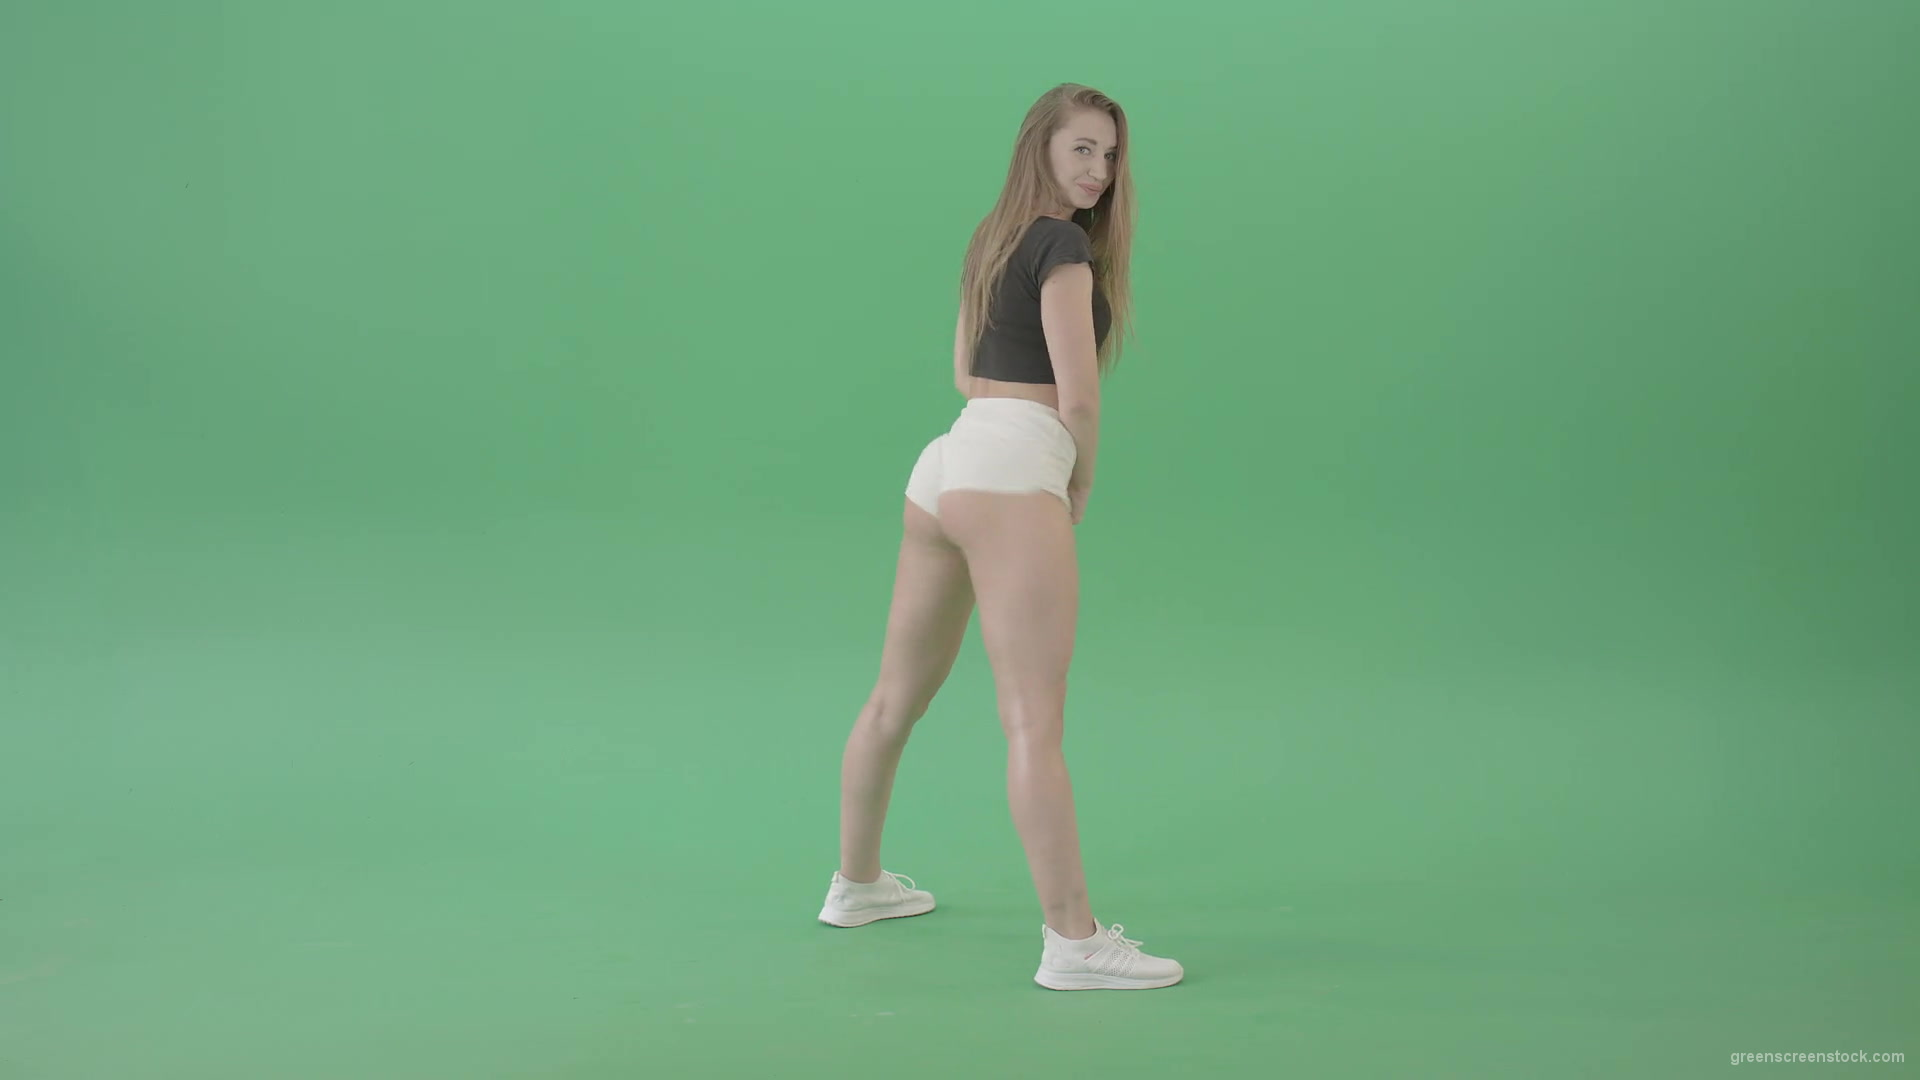 Amazing-young-woman-shaking-ass-in-side-view-twerking-dance-over-green-screen-4K-Video-Footage-1920_008 Green Screen Stock